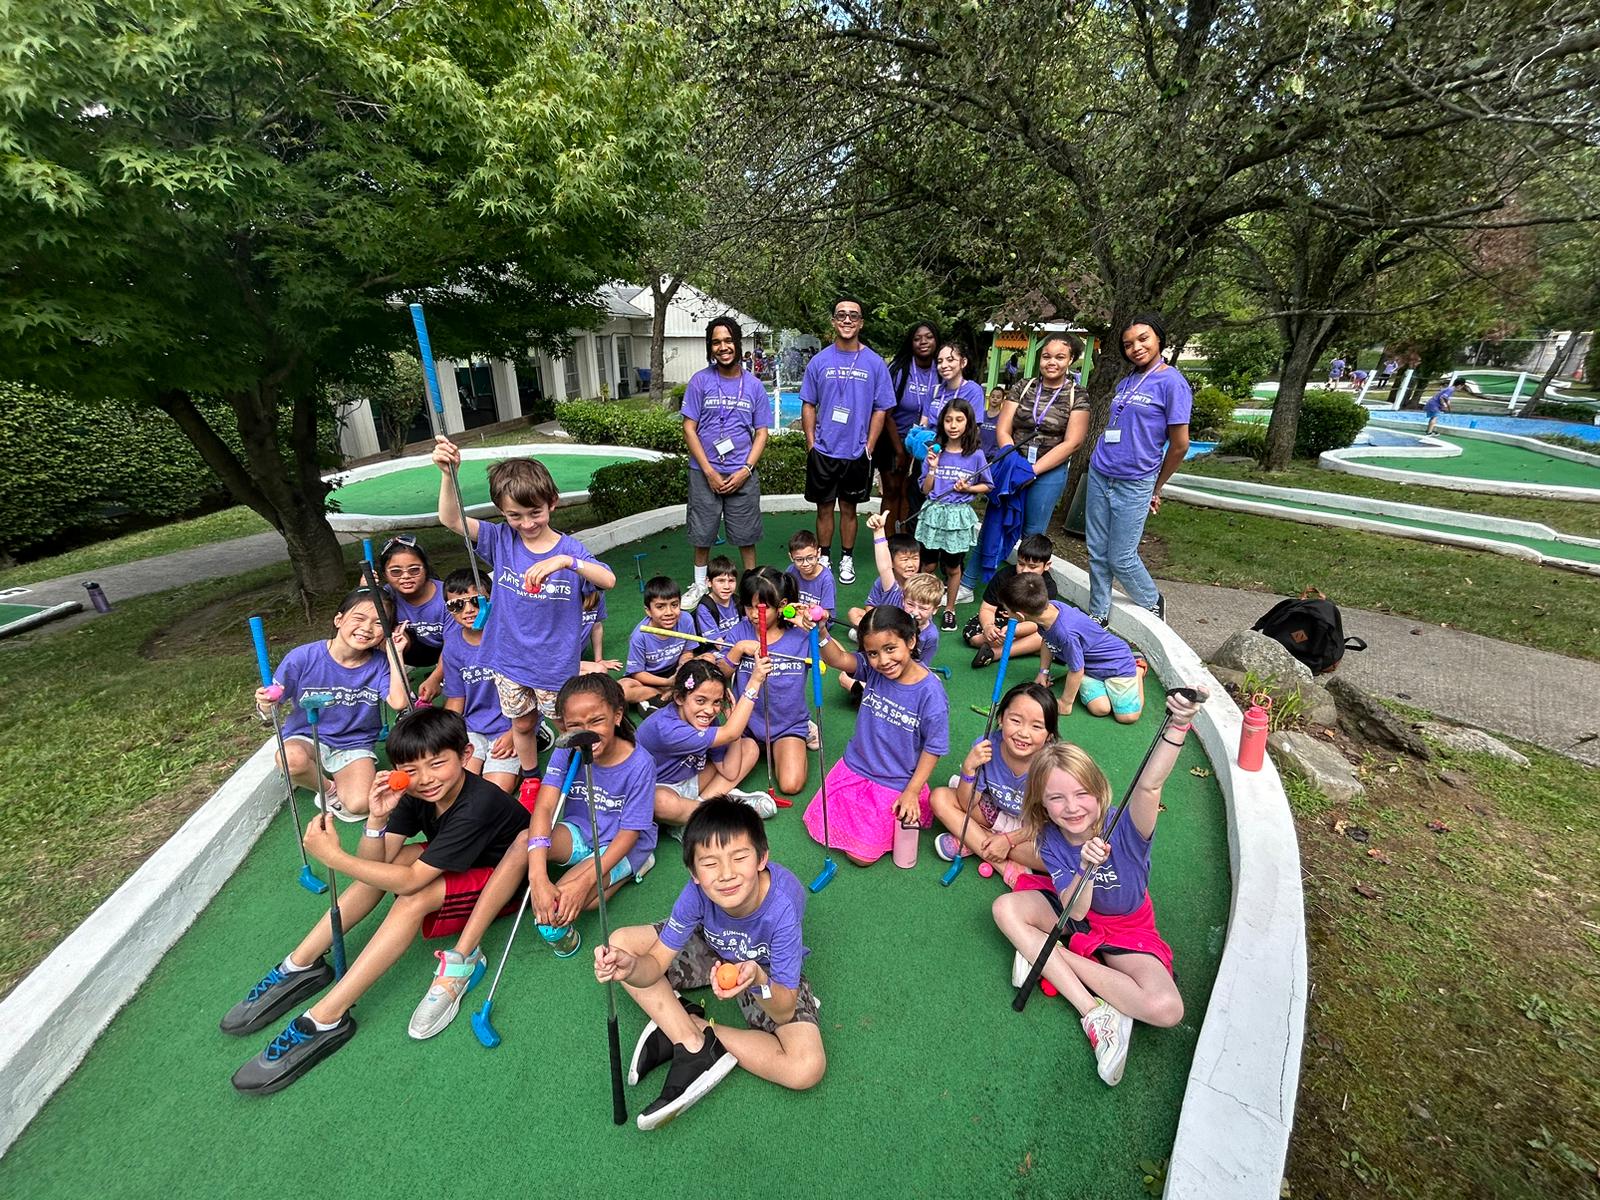 A group of children posing for a photo at a mini golf course during summer camp.